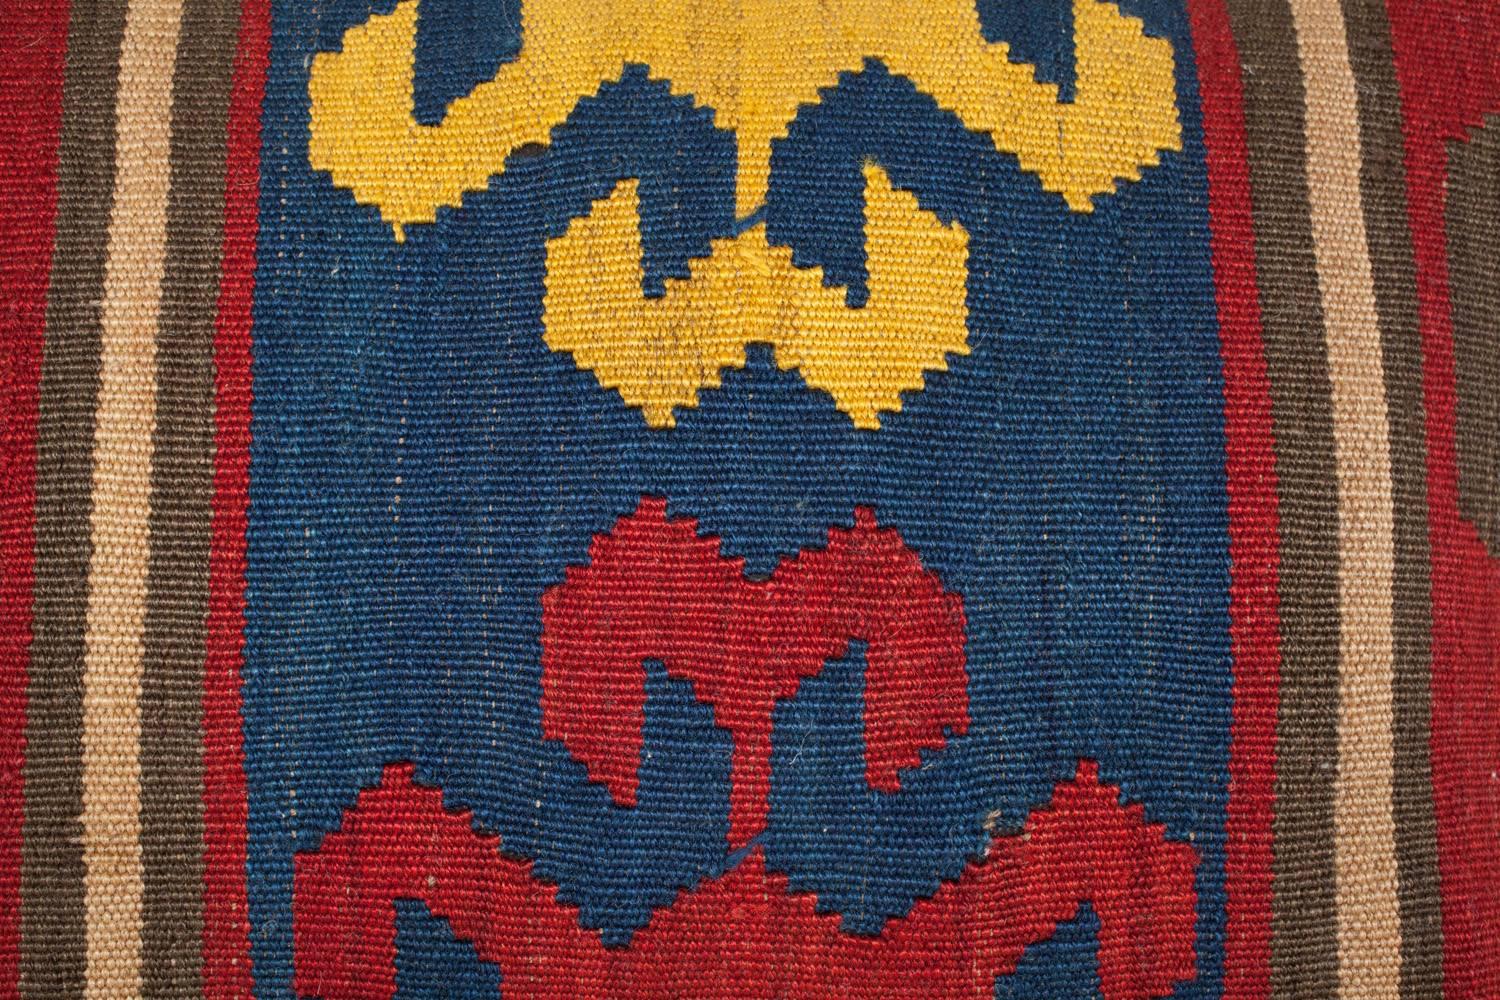 Antique Shahsevan Kilim Flat-Woven Pillow, Azerbaijan, 19th Century In Good Condition For Sale In By Appointment Only, CA